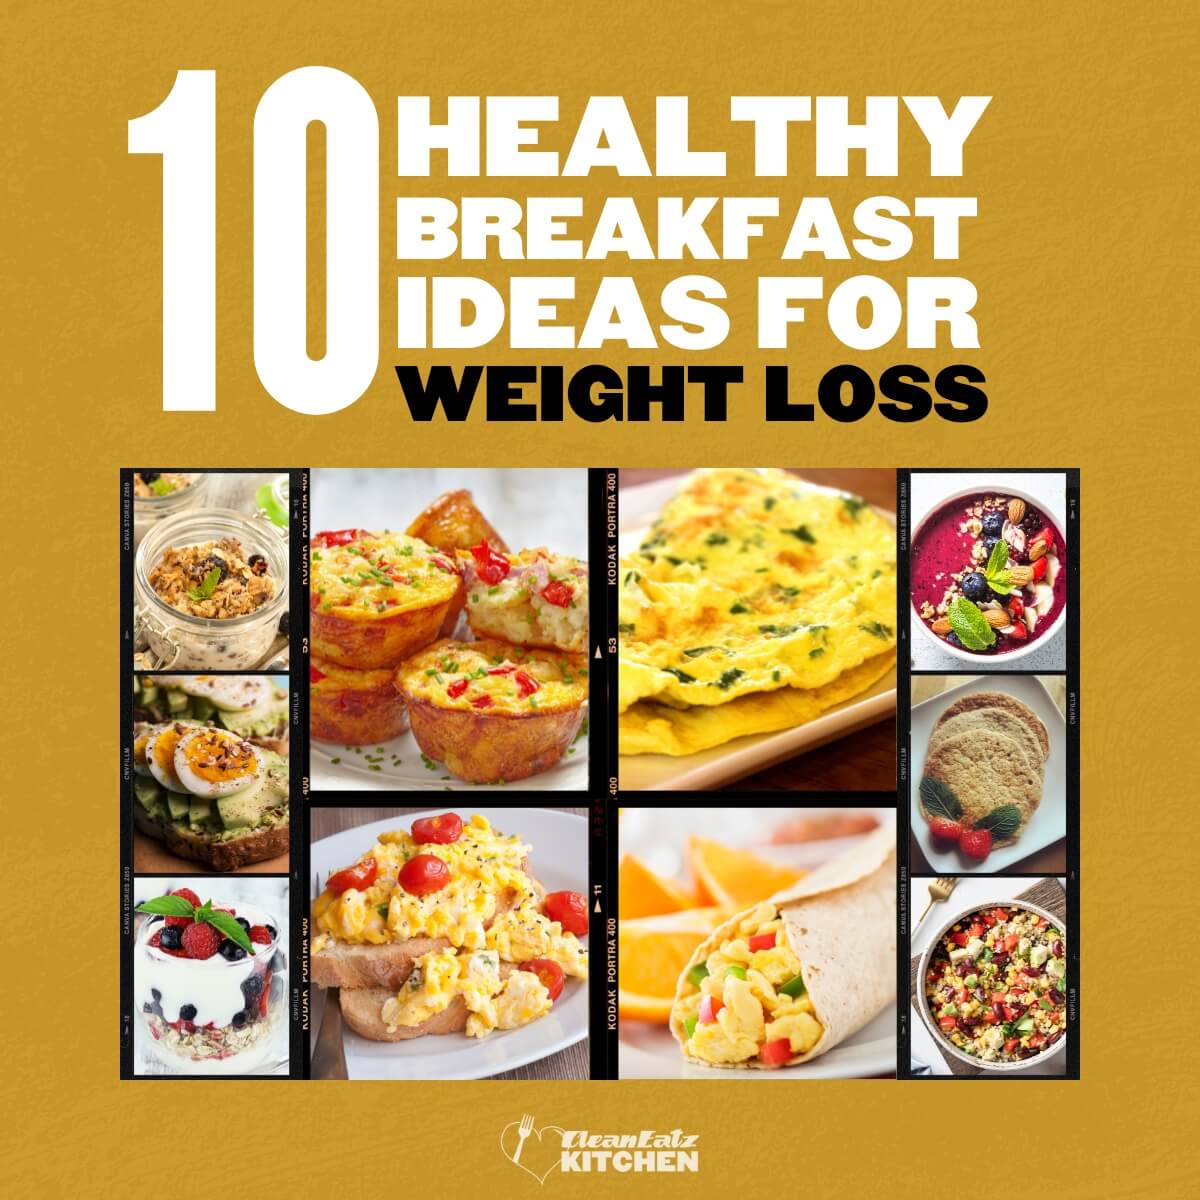 Healthy Breakfast Recipes For Weight Loss Cleaneatzkitchen